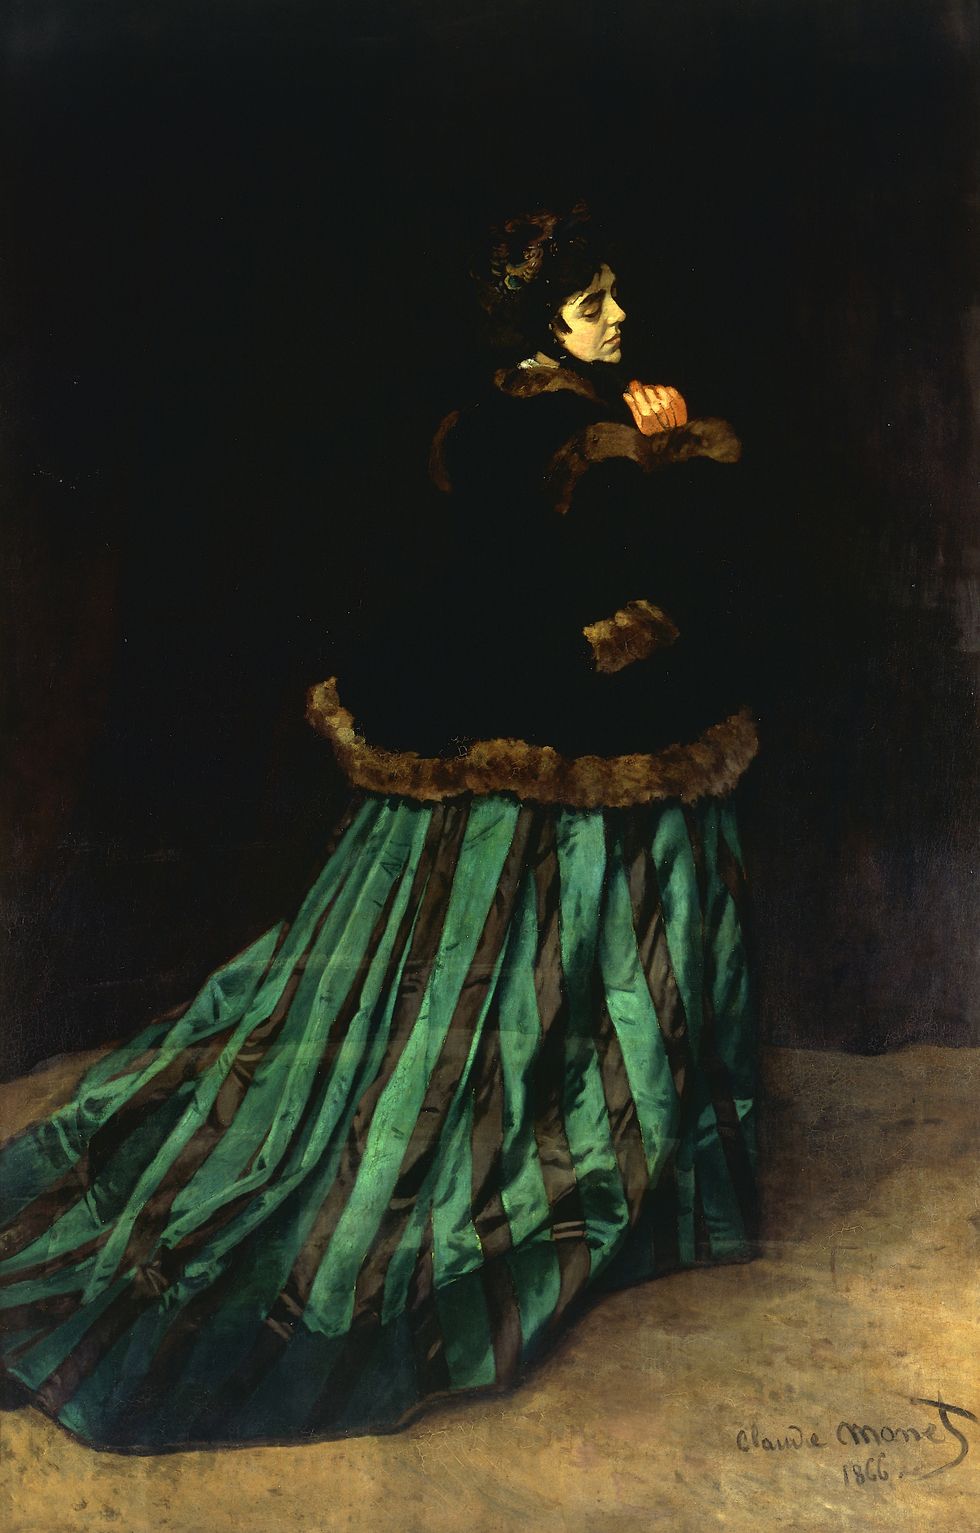 Camille (The woman in the green dress), 1866, by Claude Monet (1840-1926), oil on canvas. France, 19th century